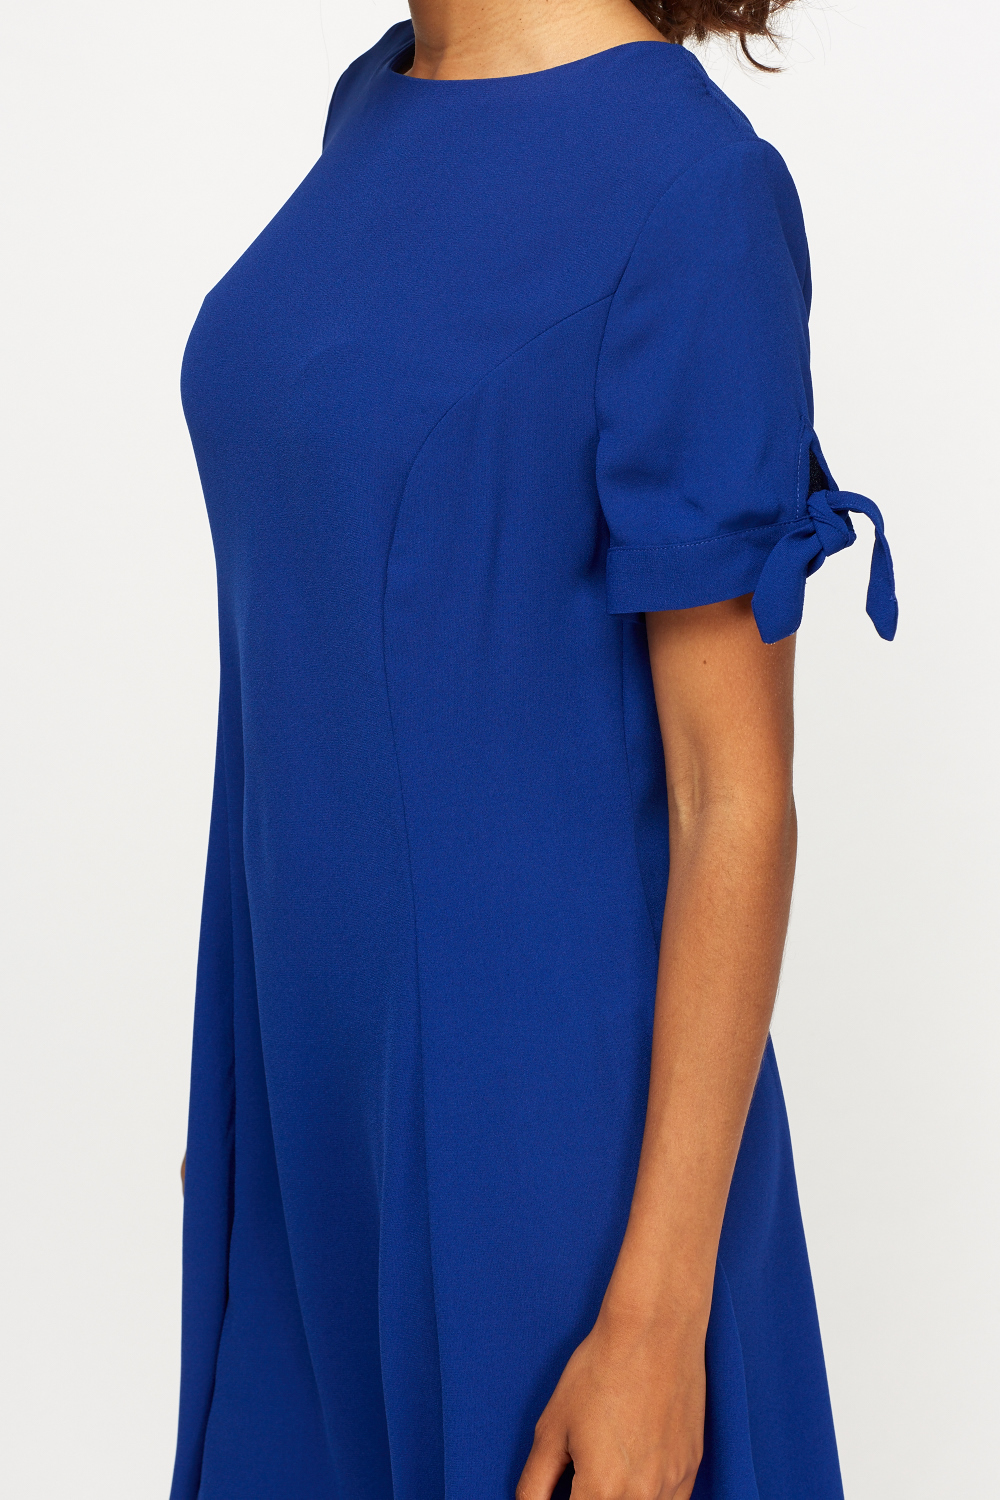 royal blue shift dress with sleeves